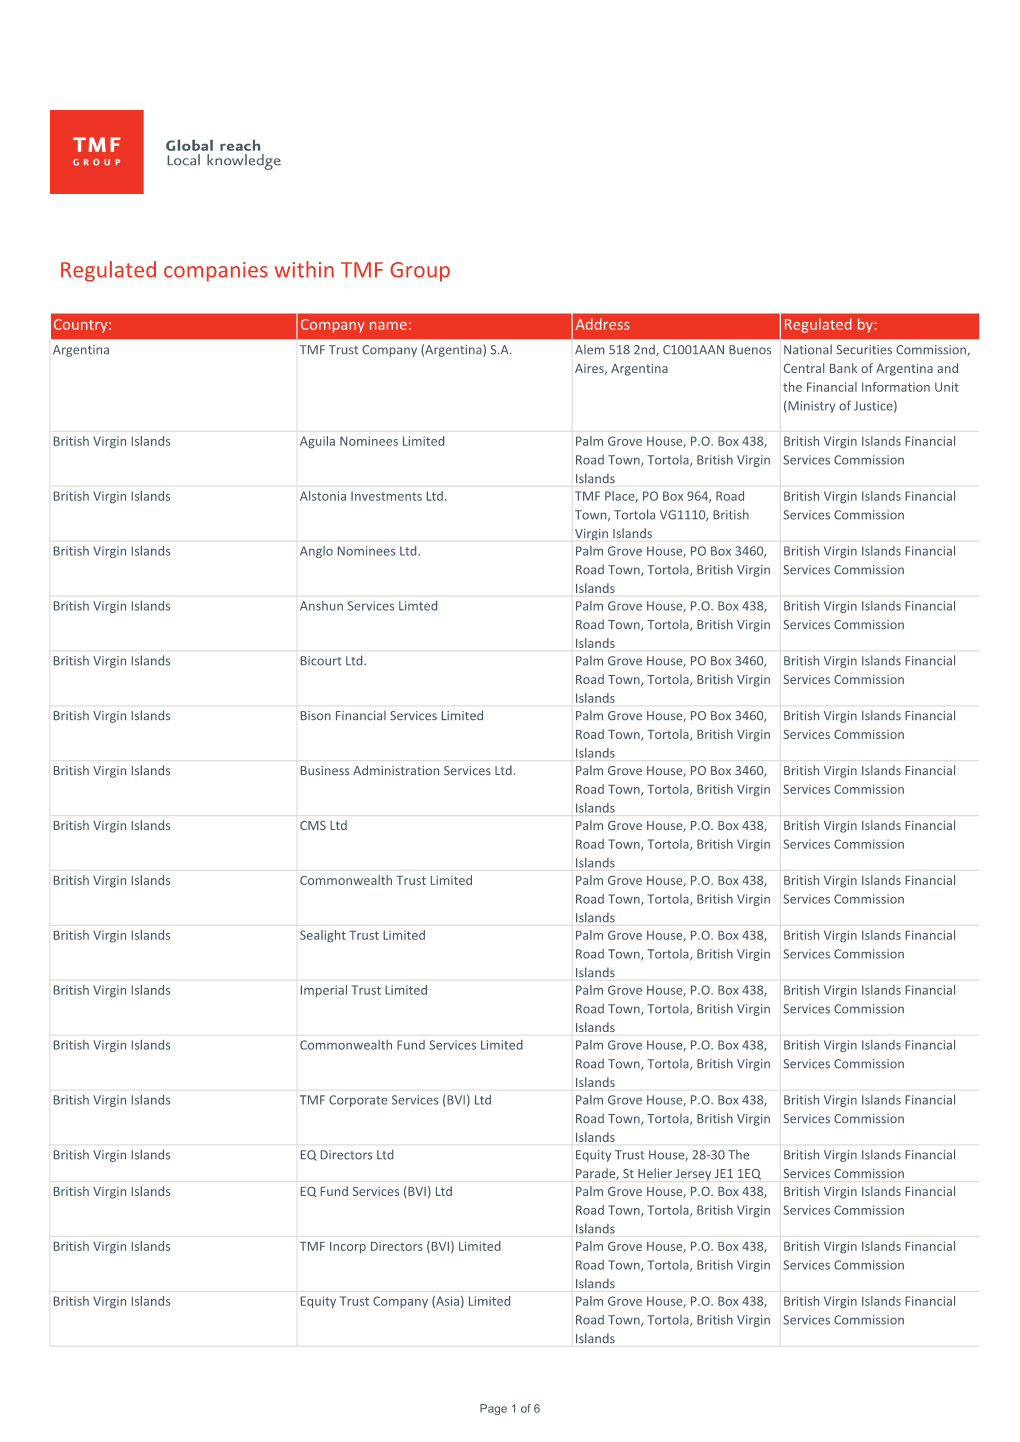 Regulated Companies Within TMF Group